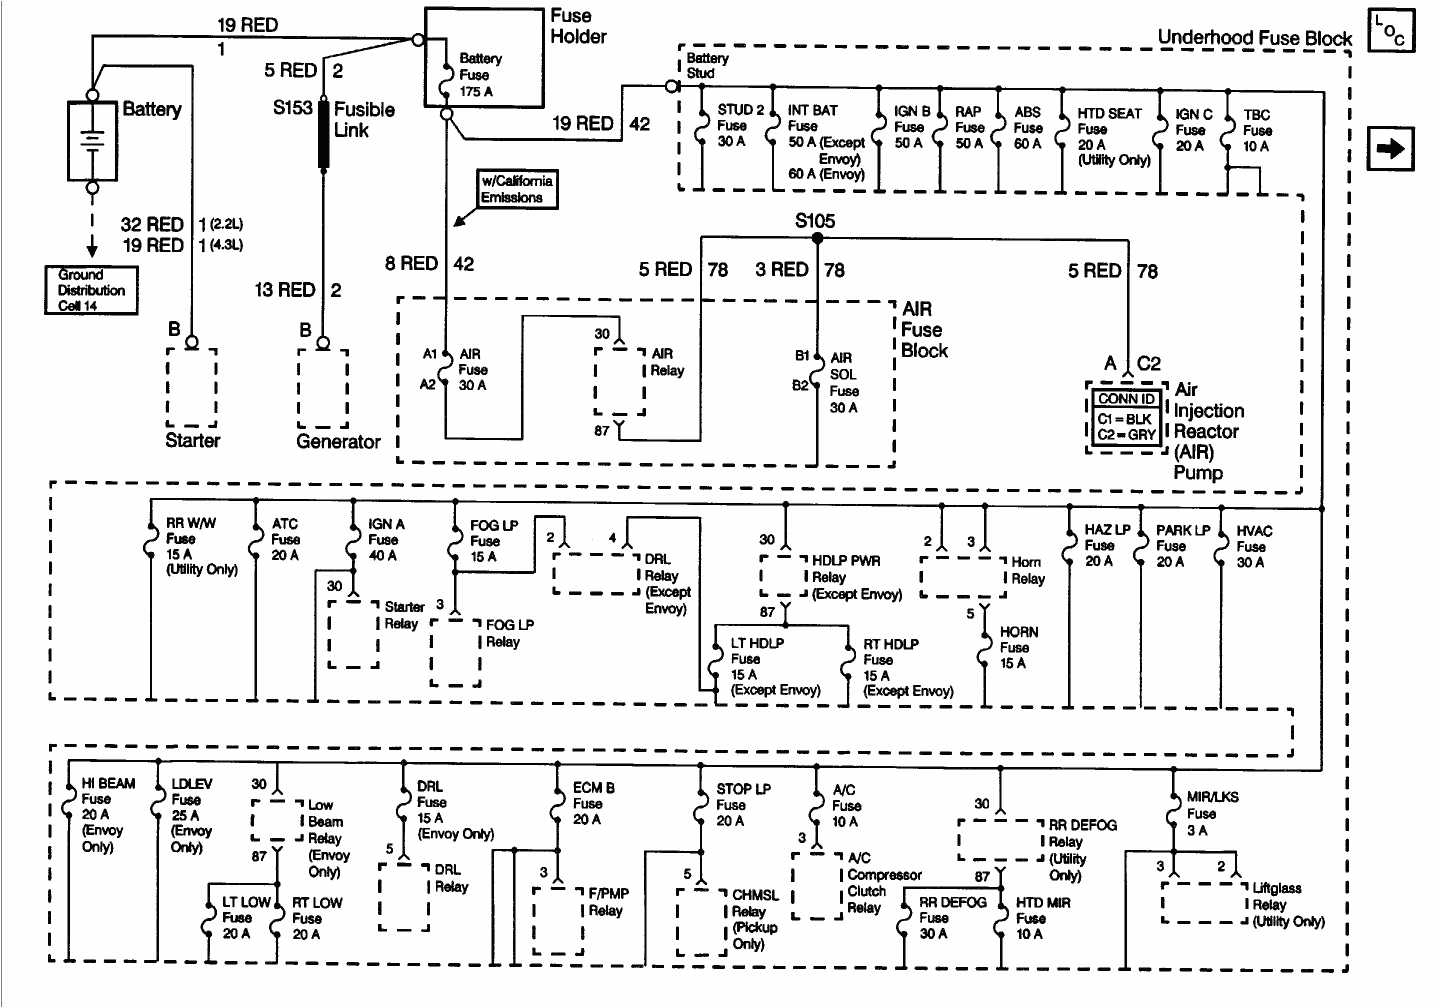 1998 chevy s10 wiring diagram 1999 s10 2 2l fuse box quesion there are two what appear to be gif